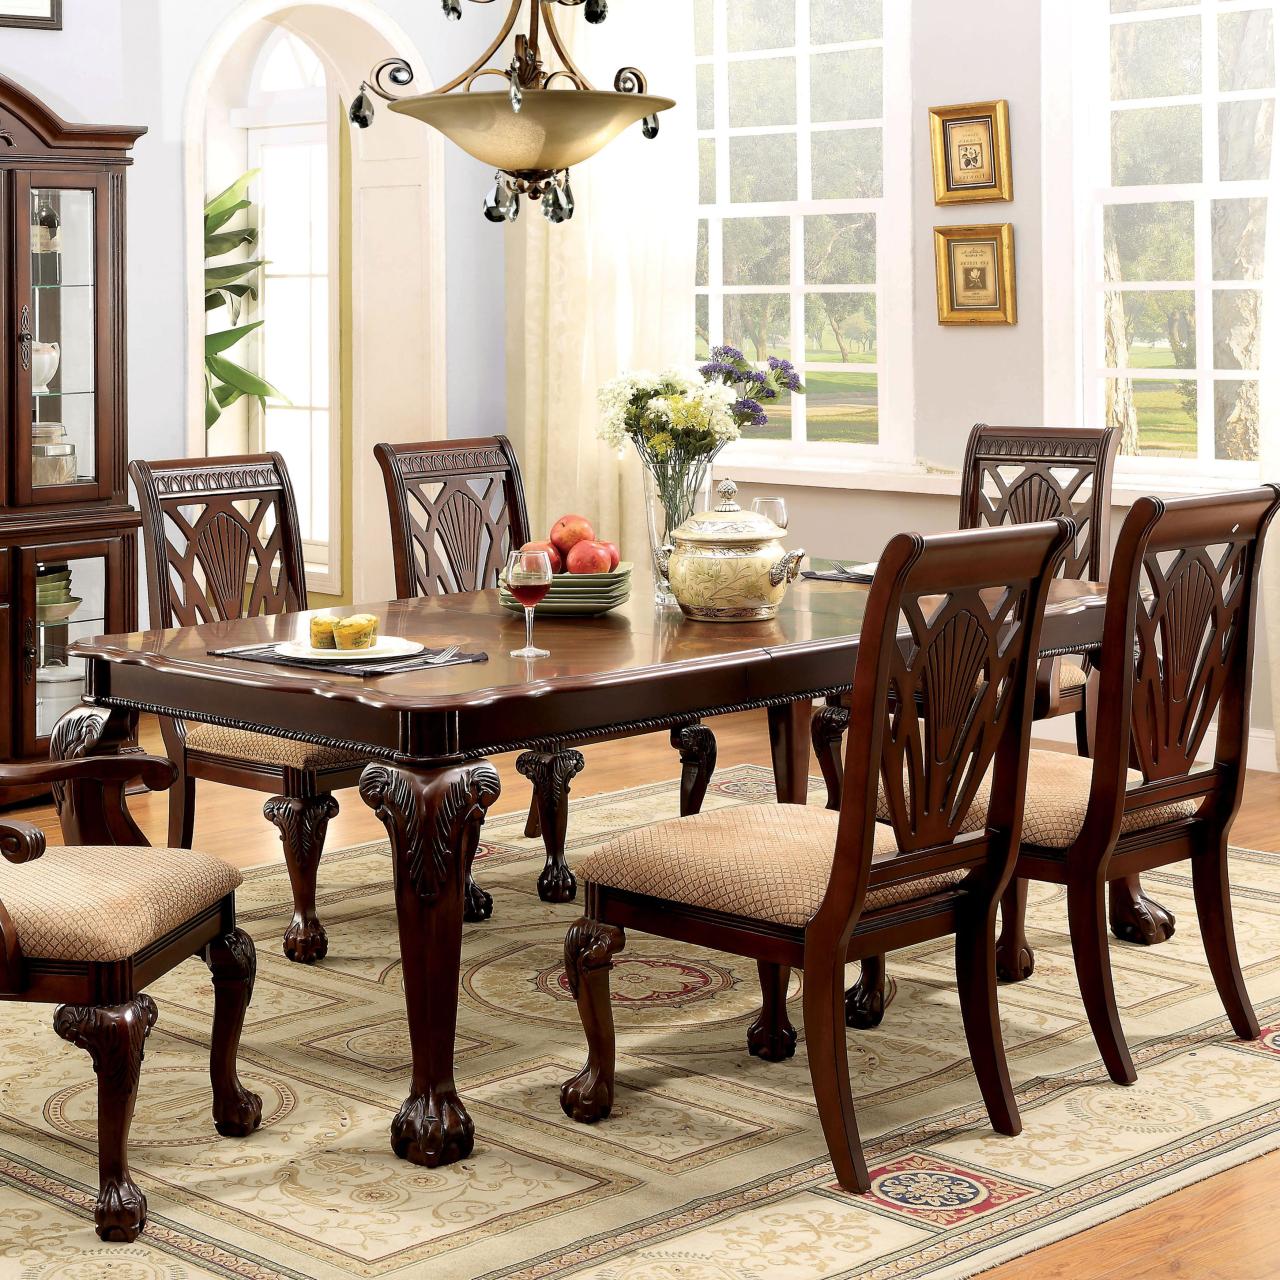 Dining set rustic walnut furniture room piece sets rectangular table america brentford felicity overstock chairs modern wood bar style finish